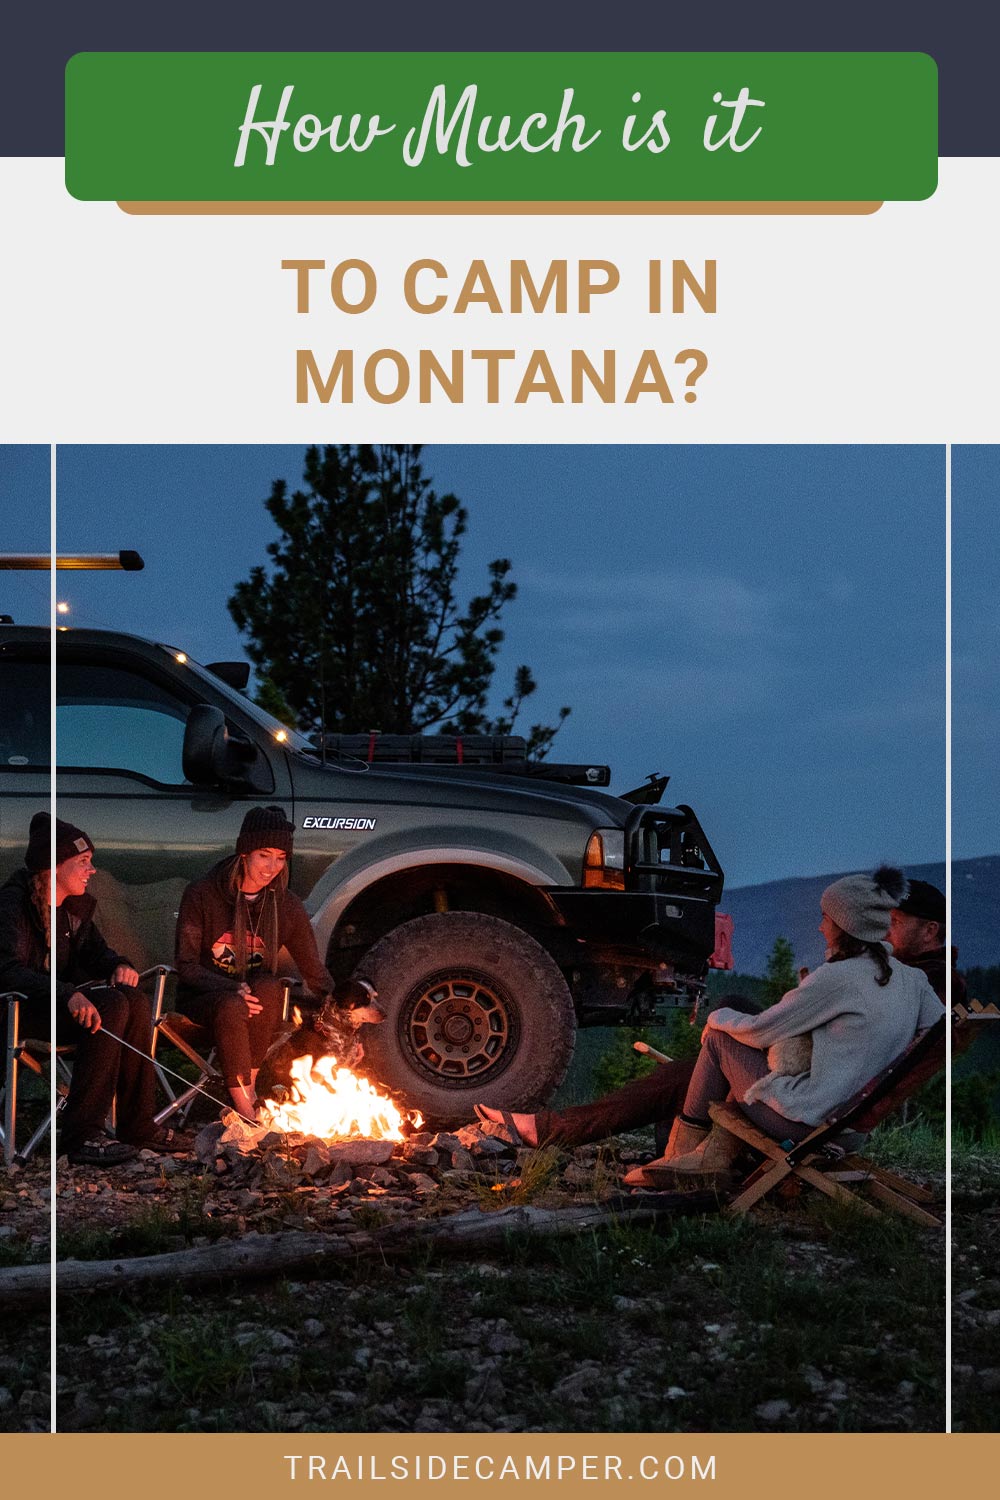 How Much is it to Camp in Montana?